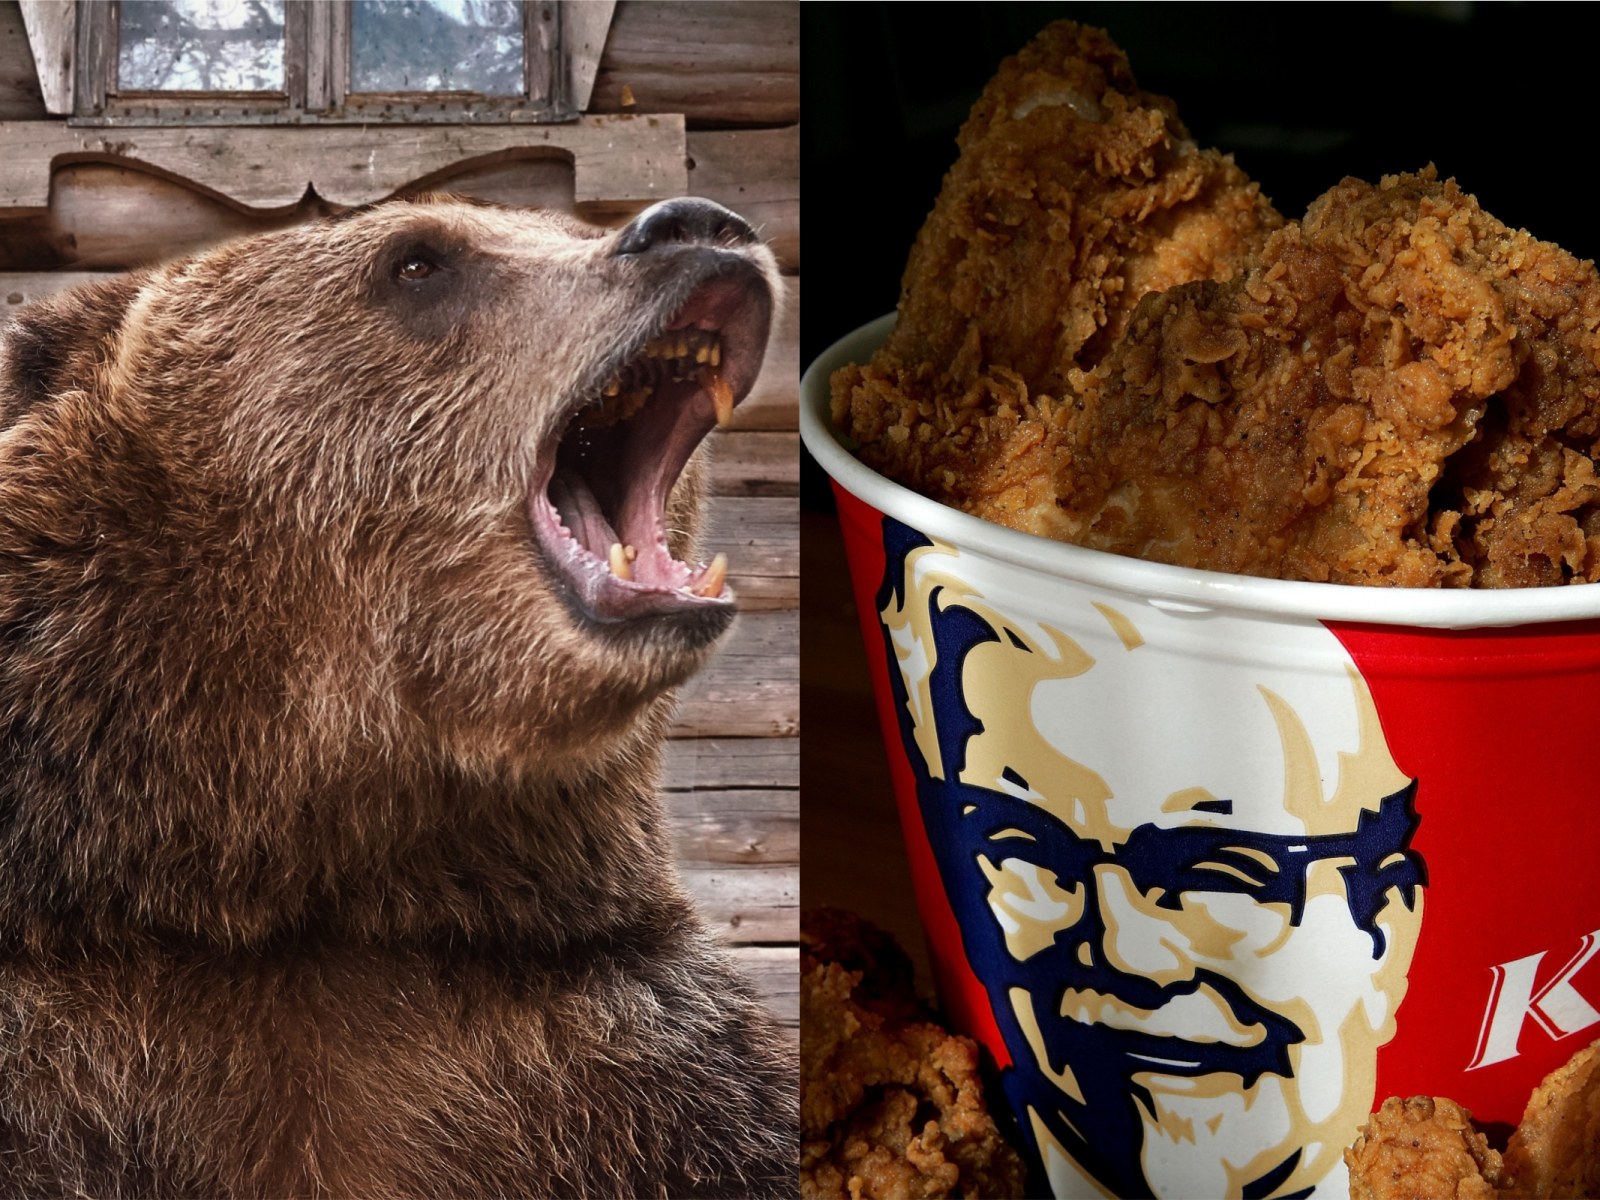 Bear Breaks Into California Home To Eat KFC Left on Kitchen Counter